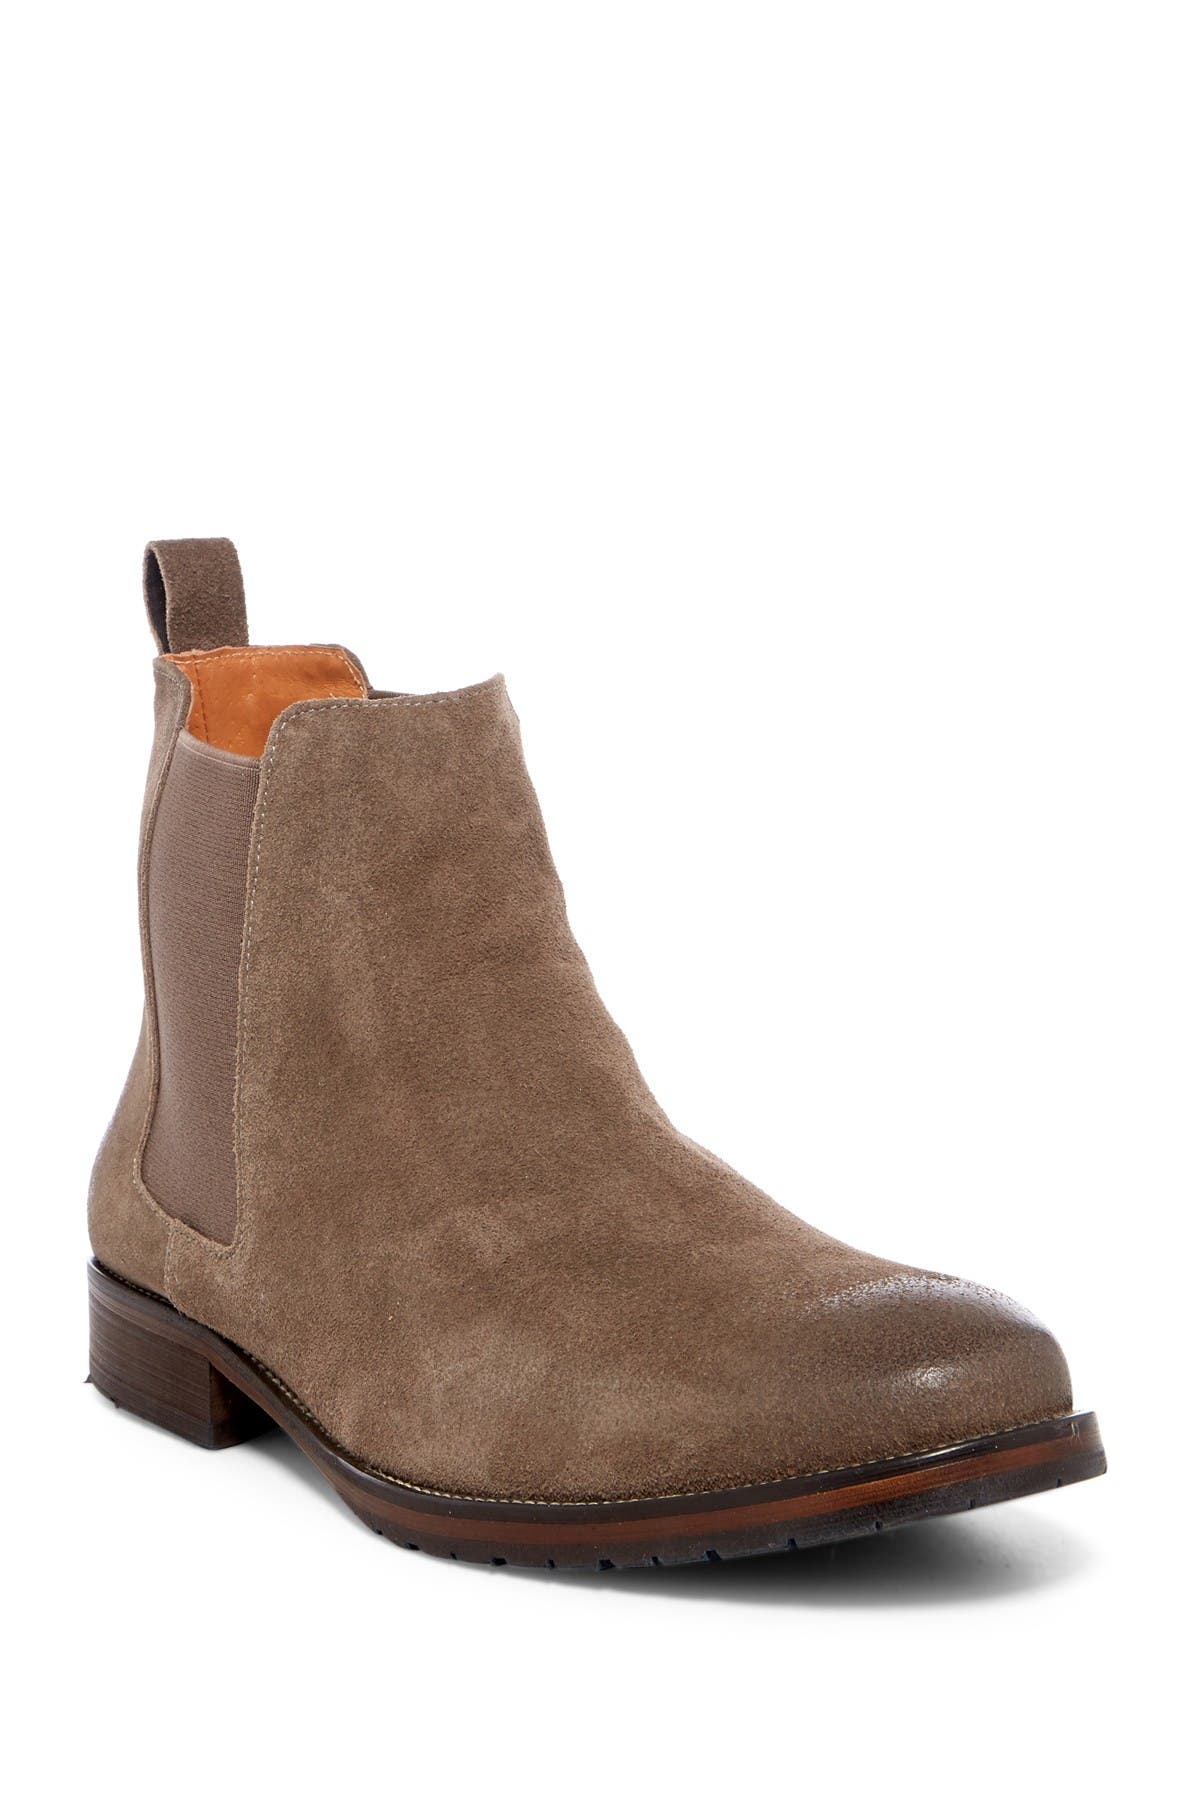 Dress Sports Suede Chelsea Boot 